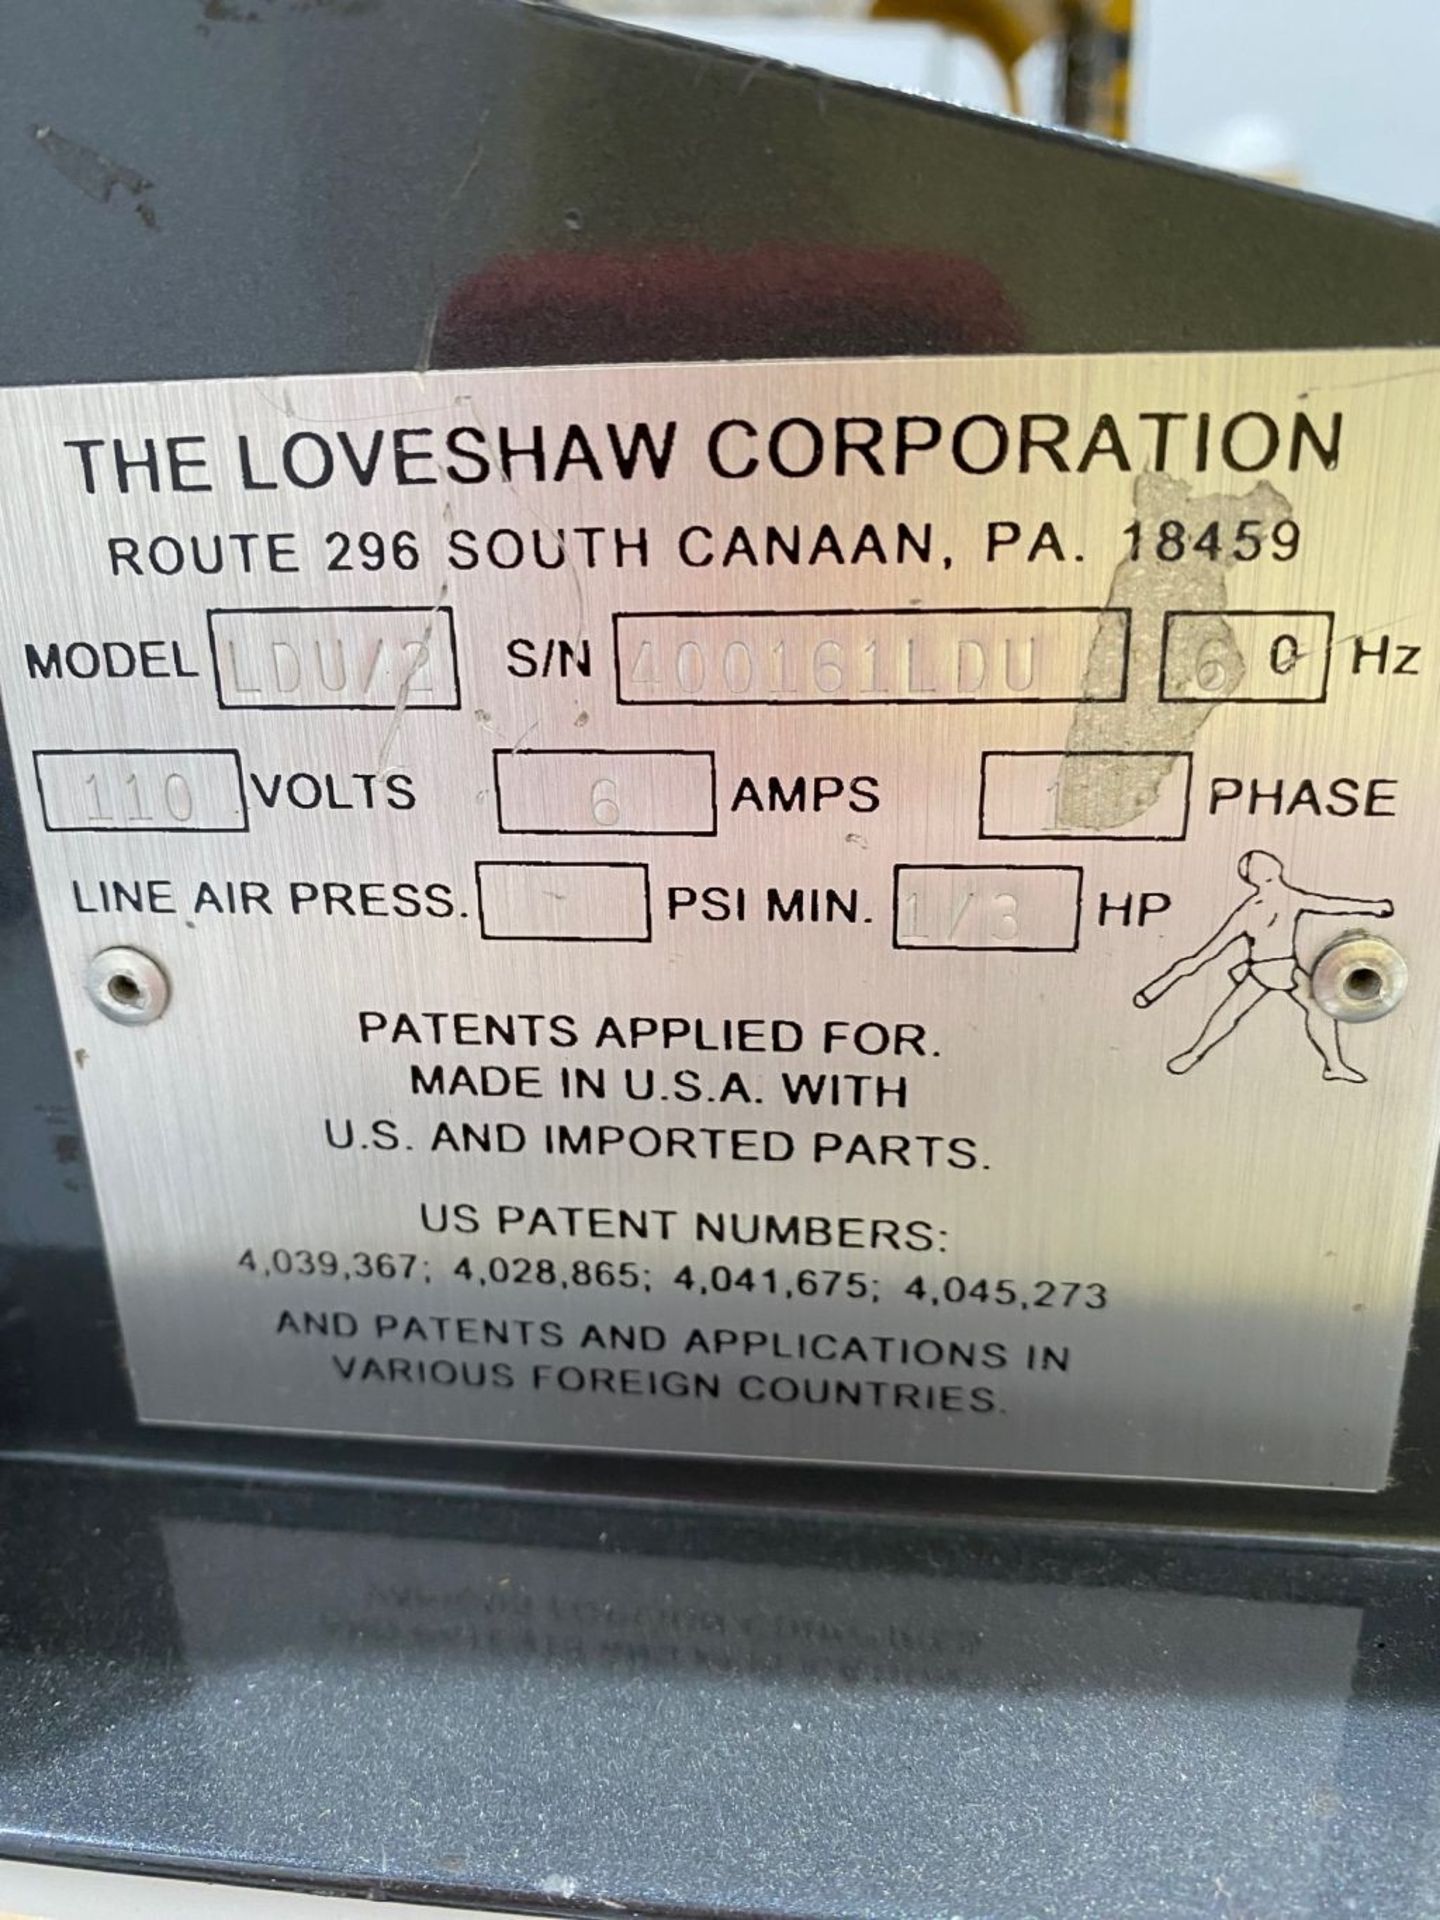 Loveshaw Case Taper. Model: LDU/2, Driven by a 1/3 Hp, 110 Volts, 1 Phase, 60 Hz motor. Missing Tape - Image 3 of 3